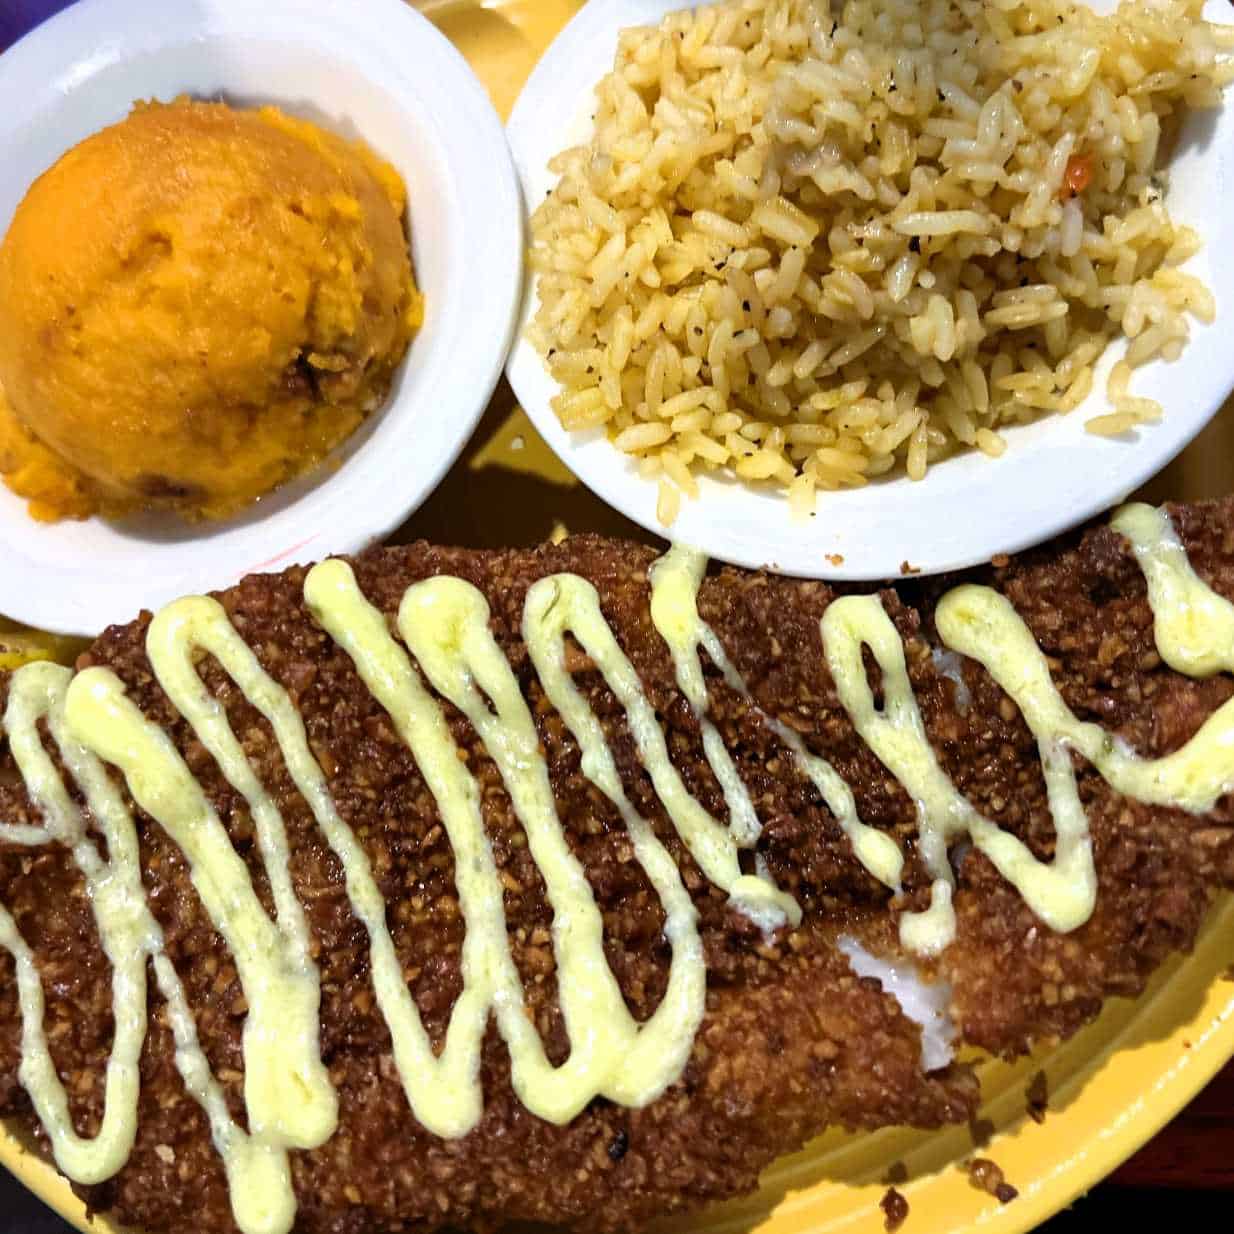 The Pecan-Encrusted fresh catch with sweet potato casserole and rice